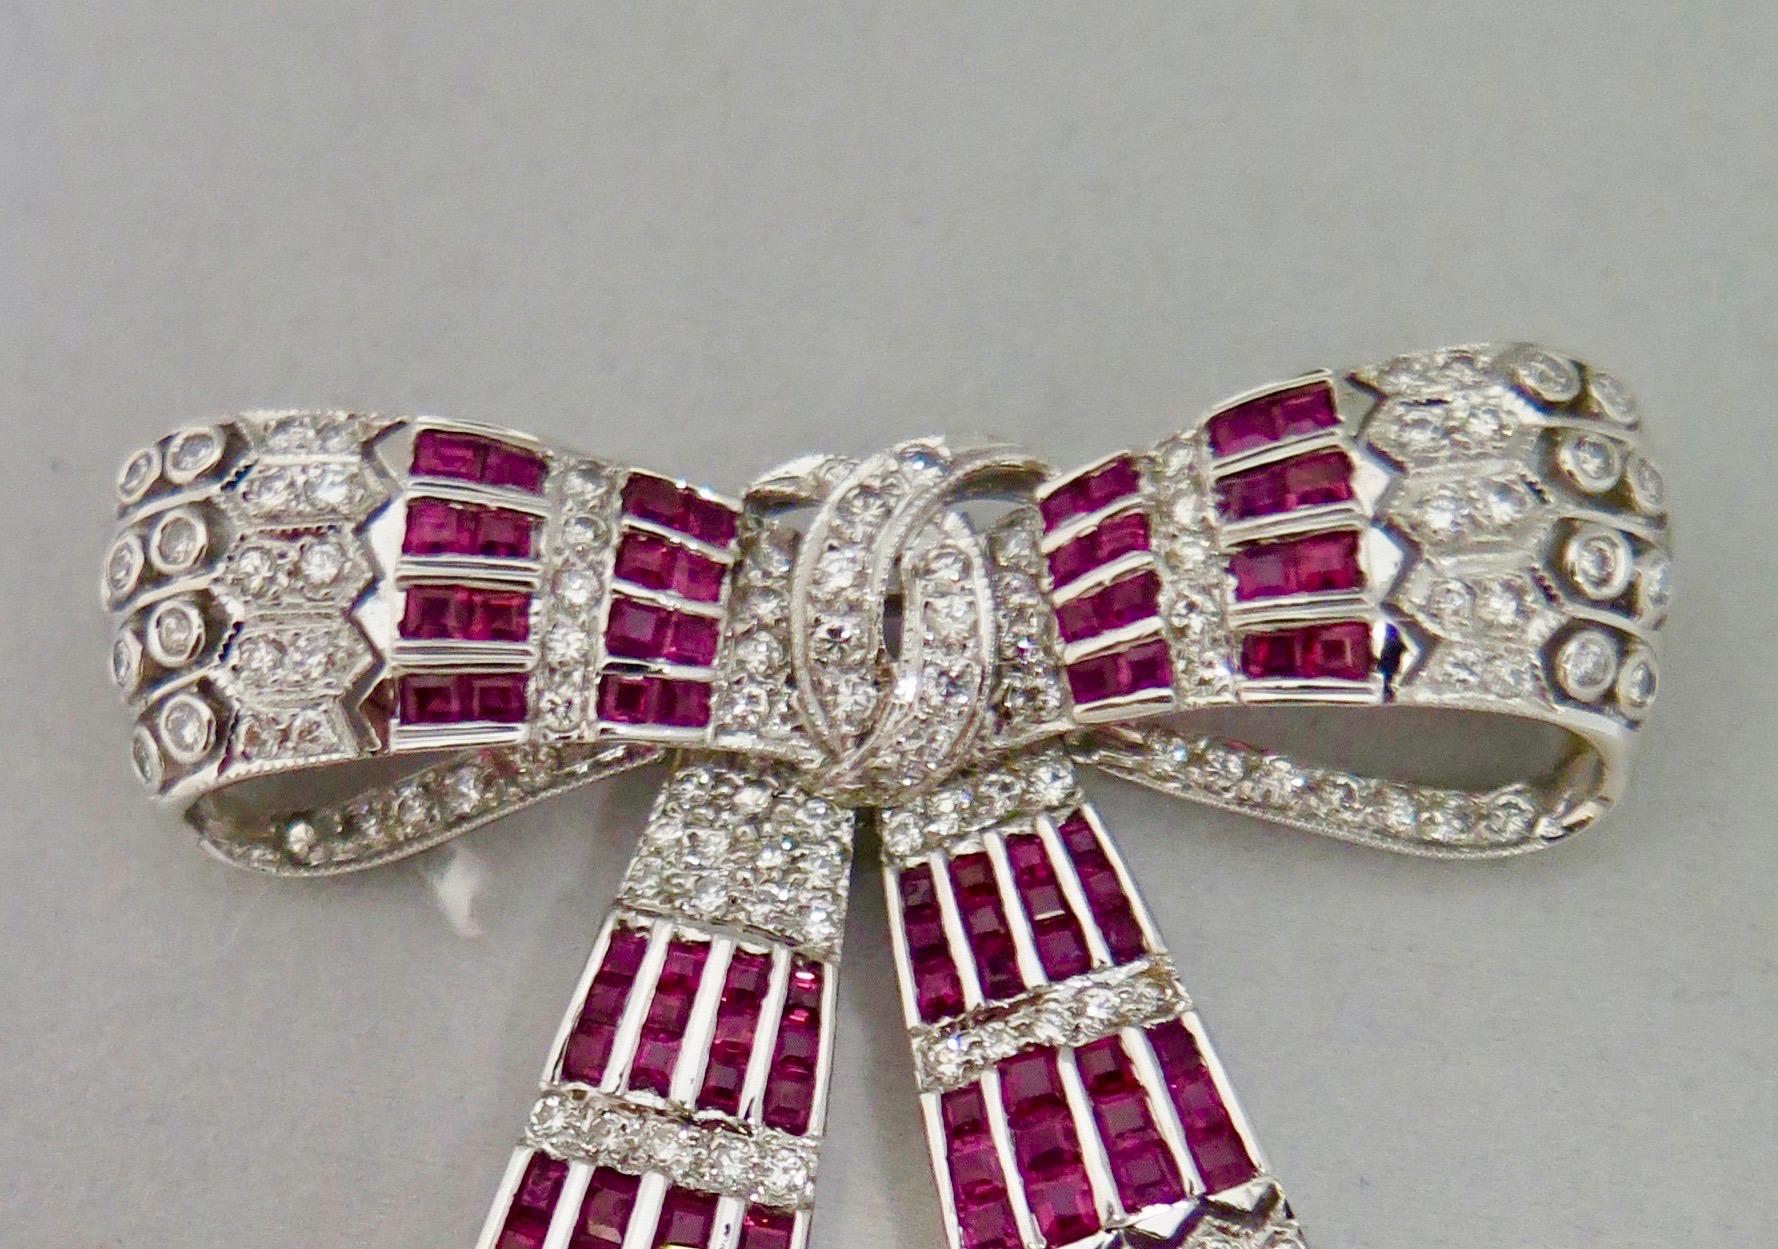 This vintage early 20th century 18-Karat gold jeweled bow brooch is designed with a dazzling array of sparkling diamonds and rubies. The bow is embellished with 158 diamonds (1.75 carats) and 80 rubies (3.08 carats) creating a stunning jewelry